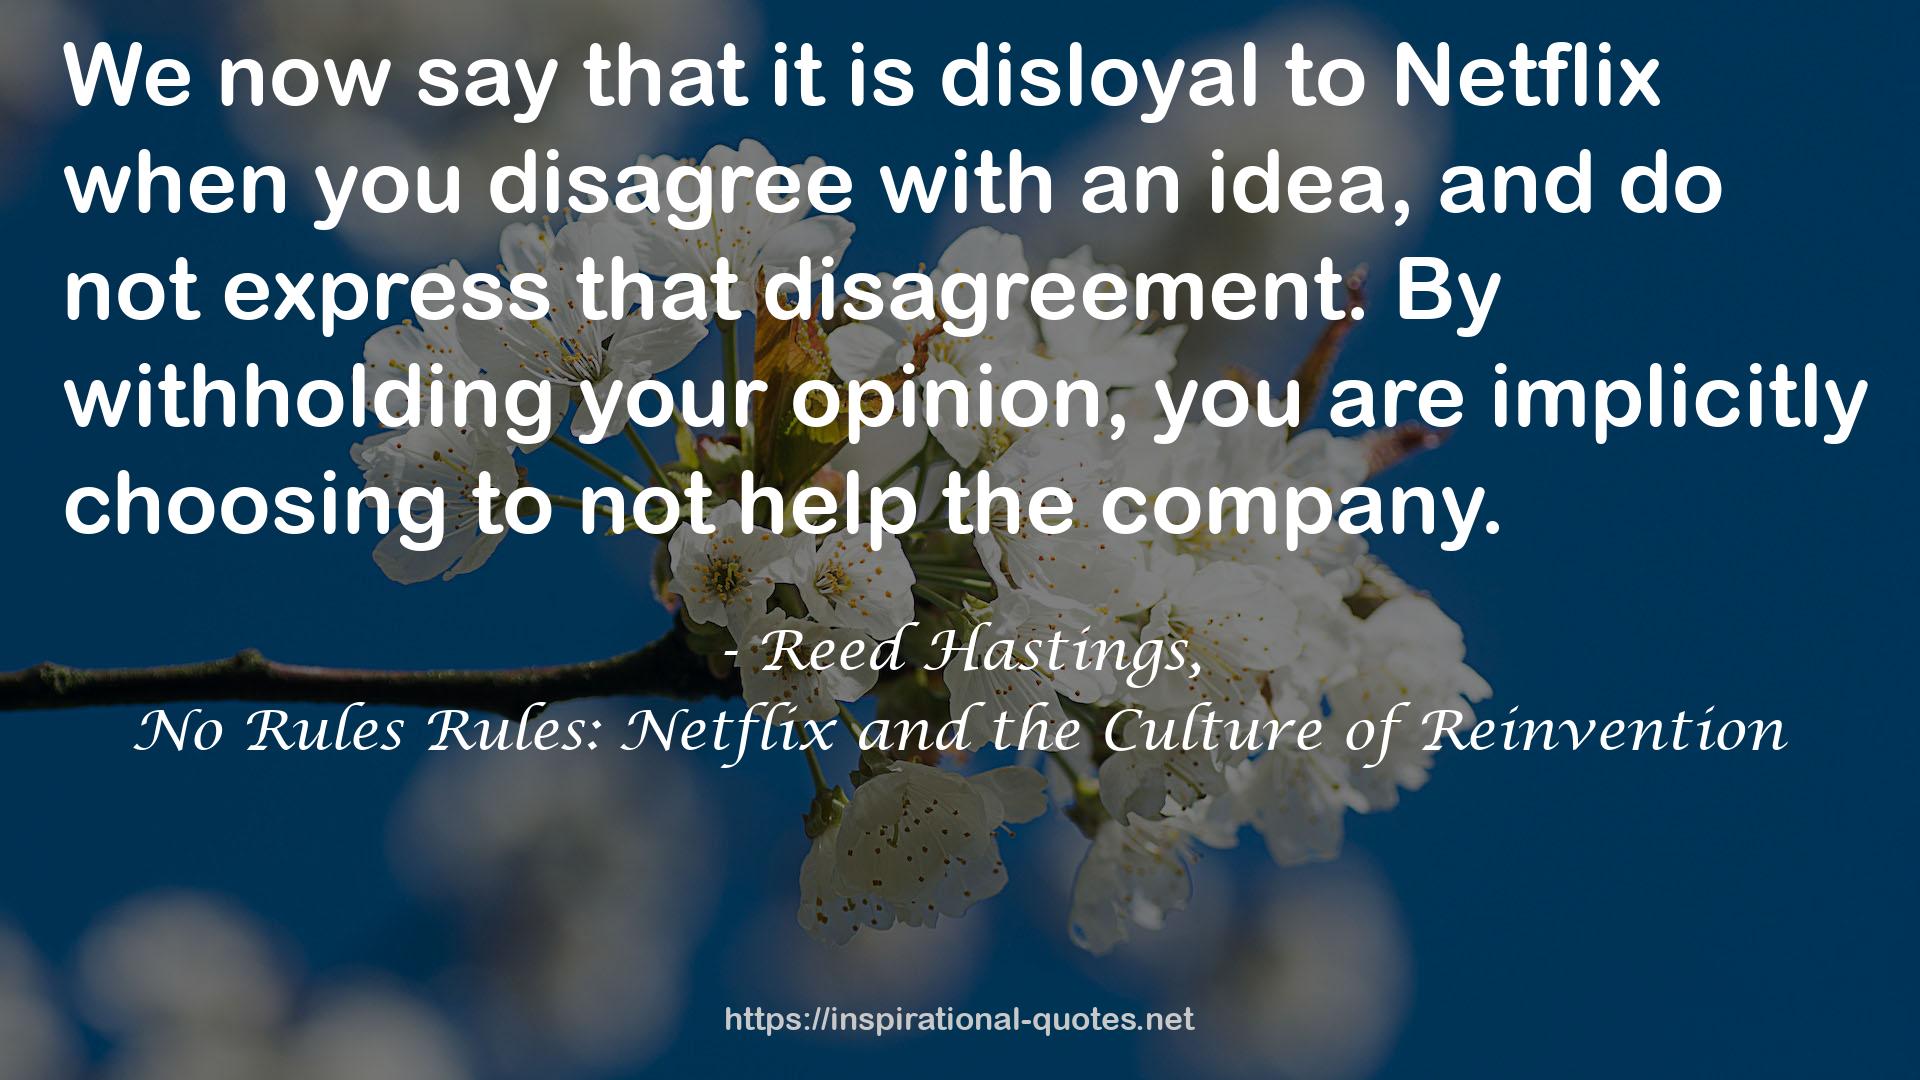 Reed Hastings, QUOTES